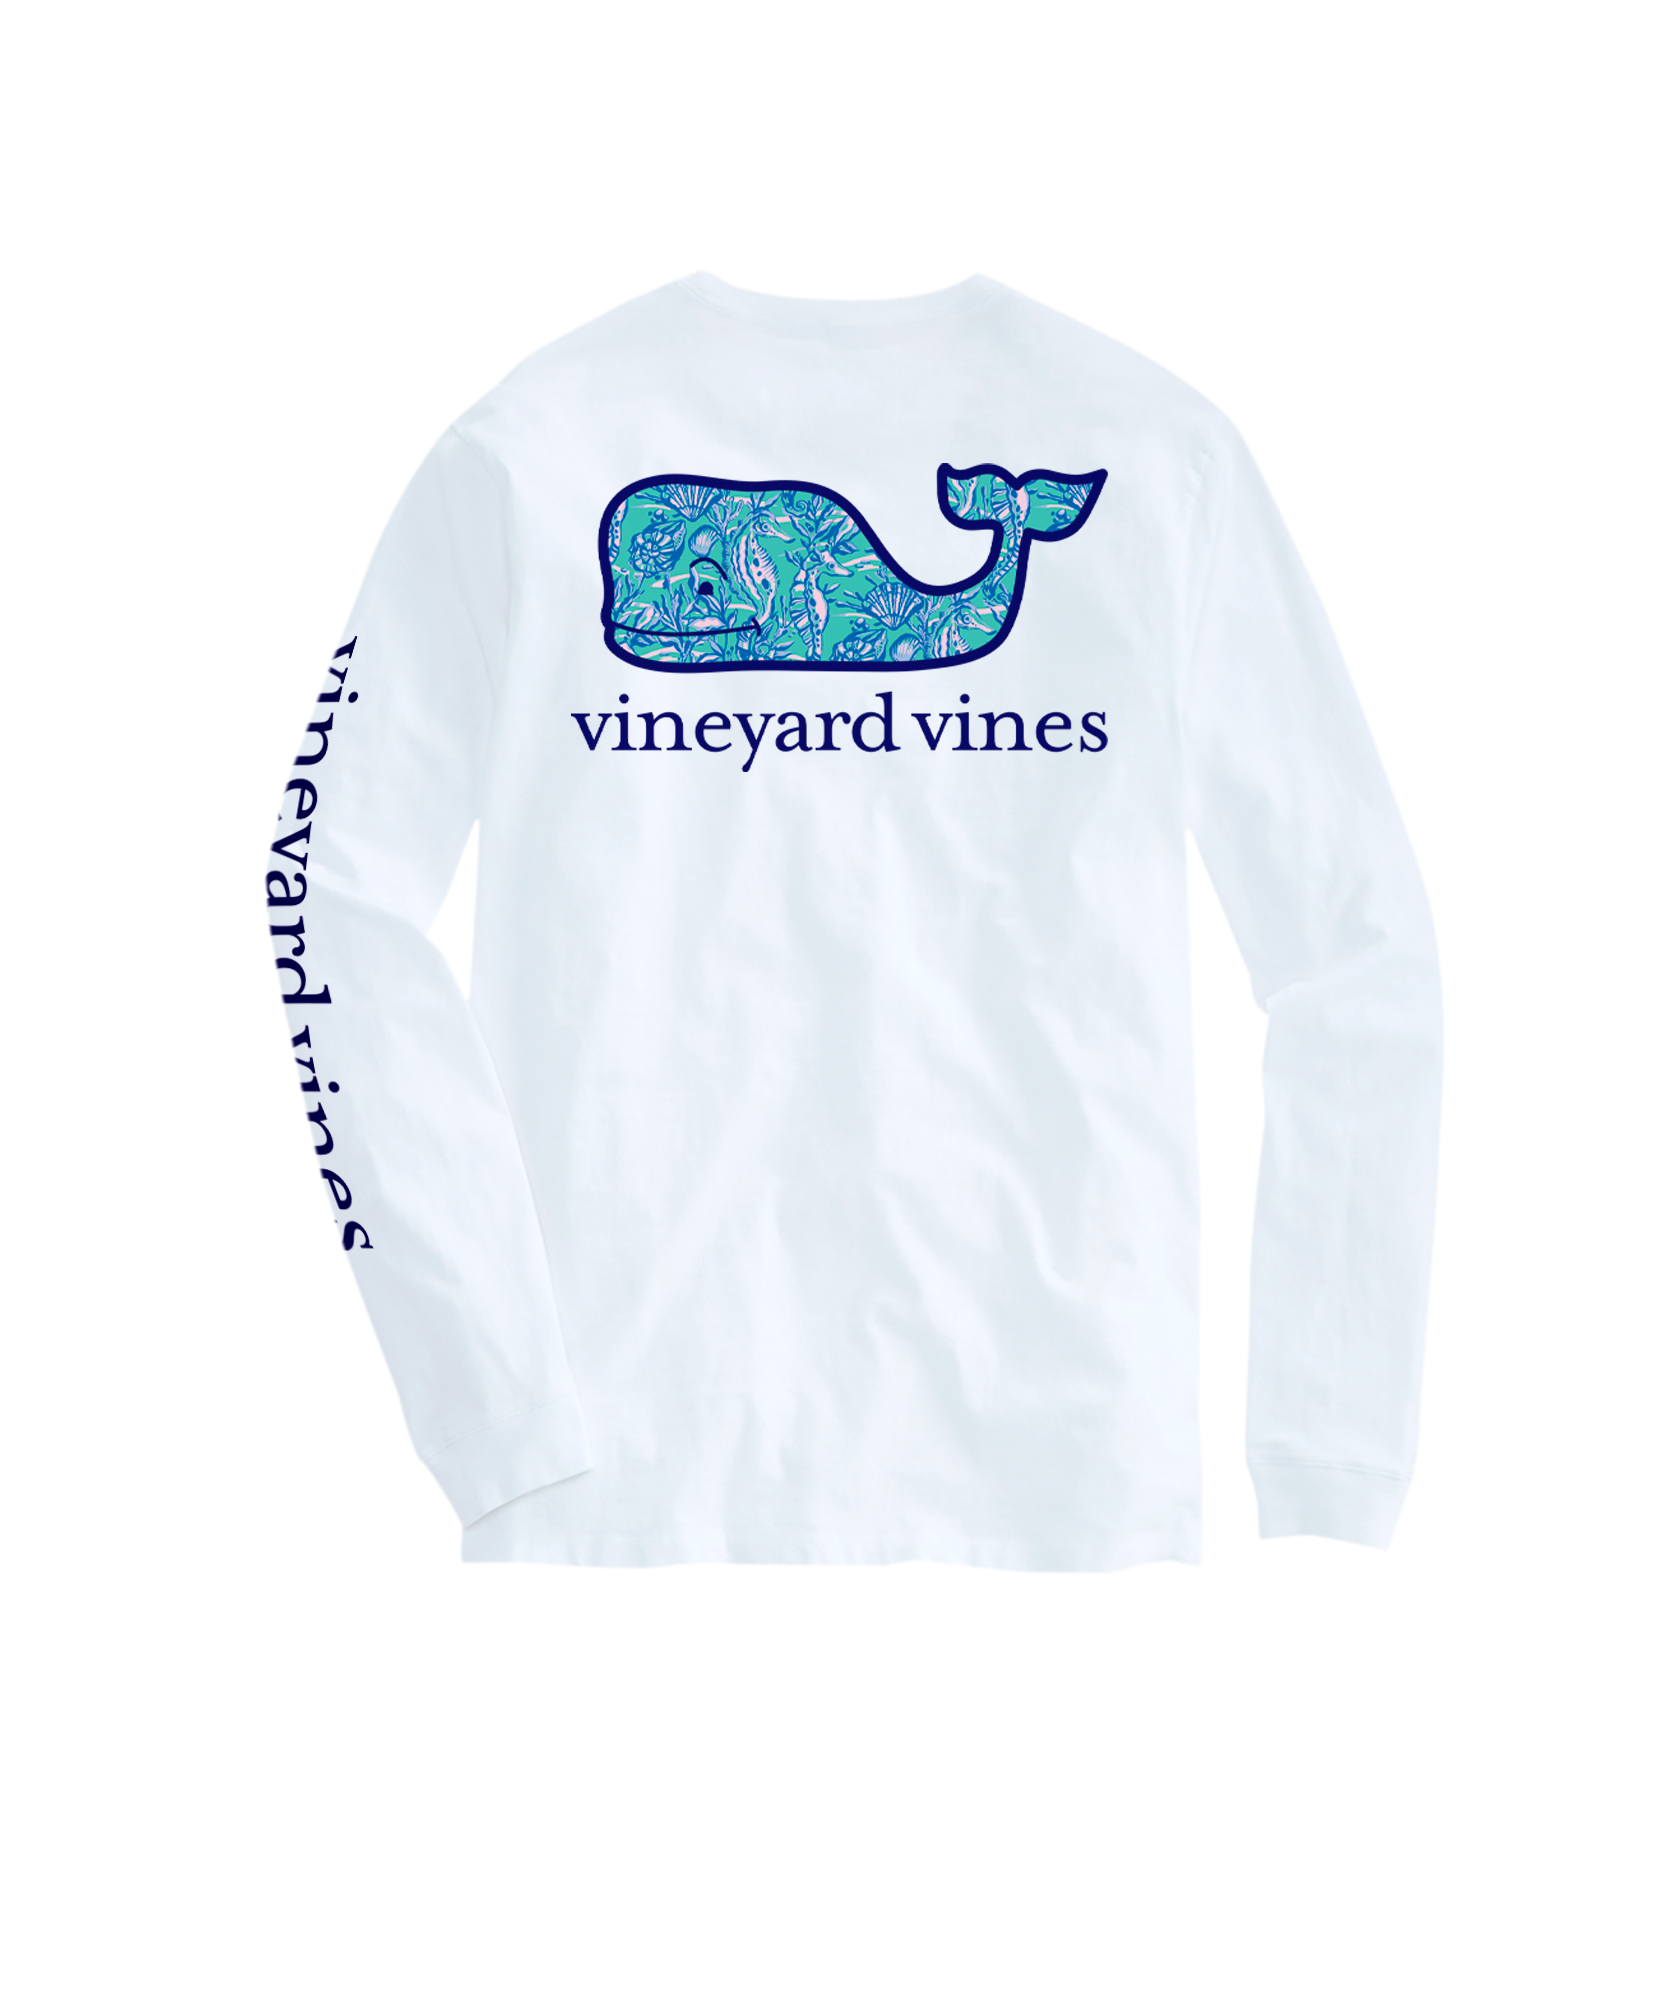 Shop OUTLET Seahorse Whale Long-Sleeve Pocket Tee at vineyard vines